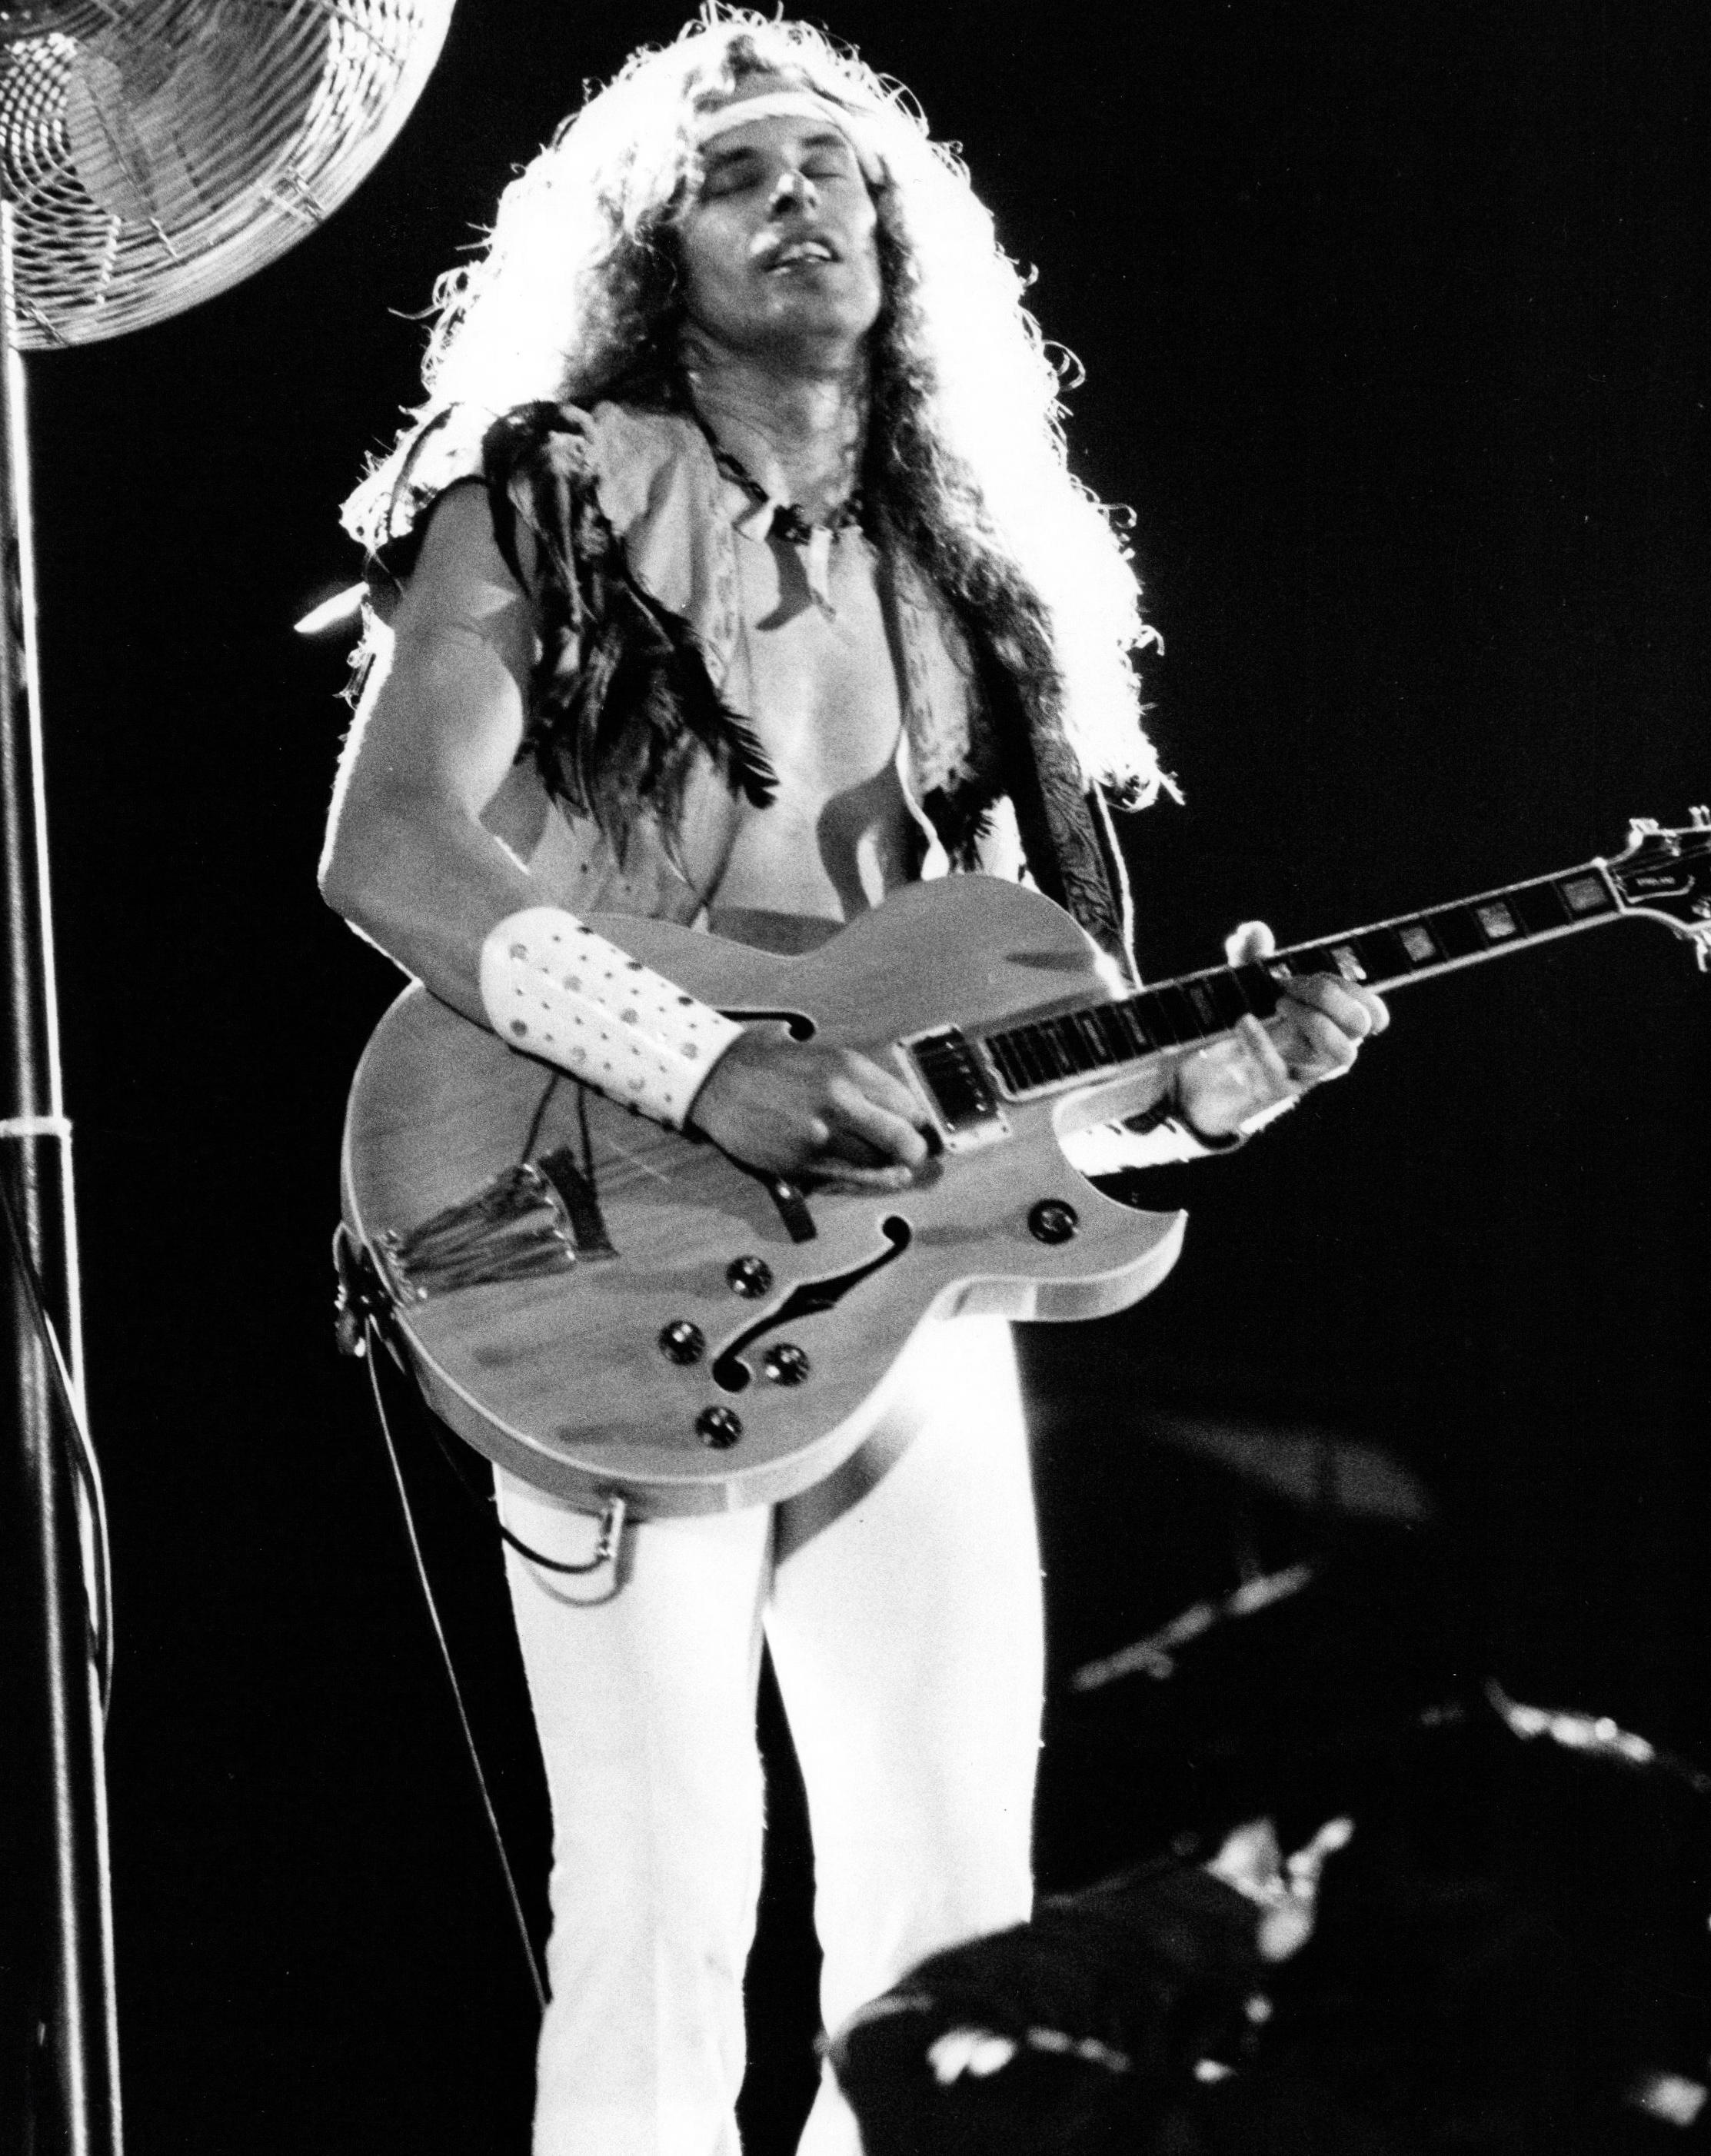 Chris Walter Portrait Photograph - Ted Nugent Performing with Eyes Closed Vintage Original Photograph